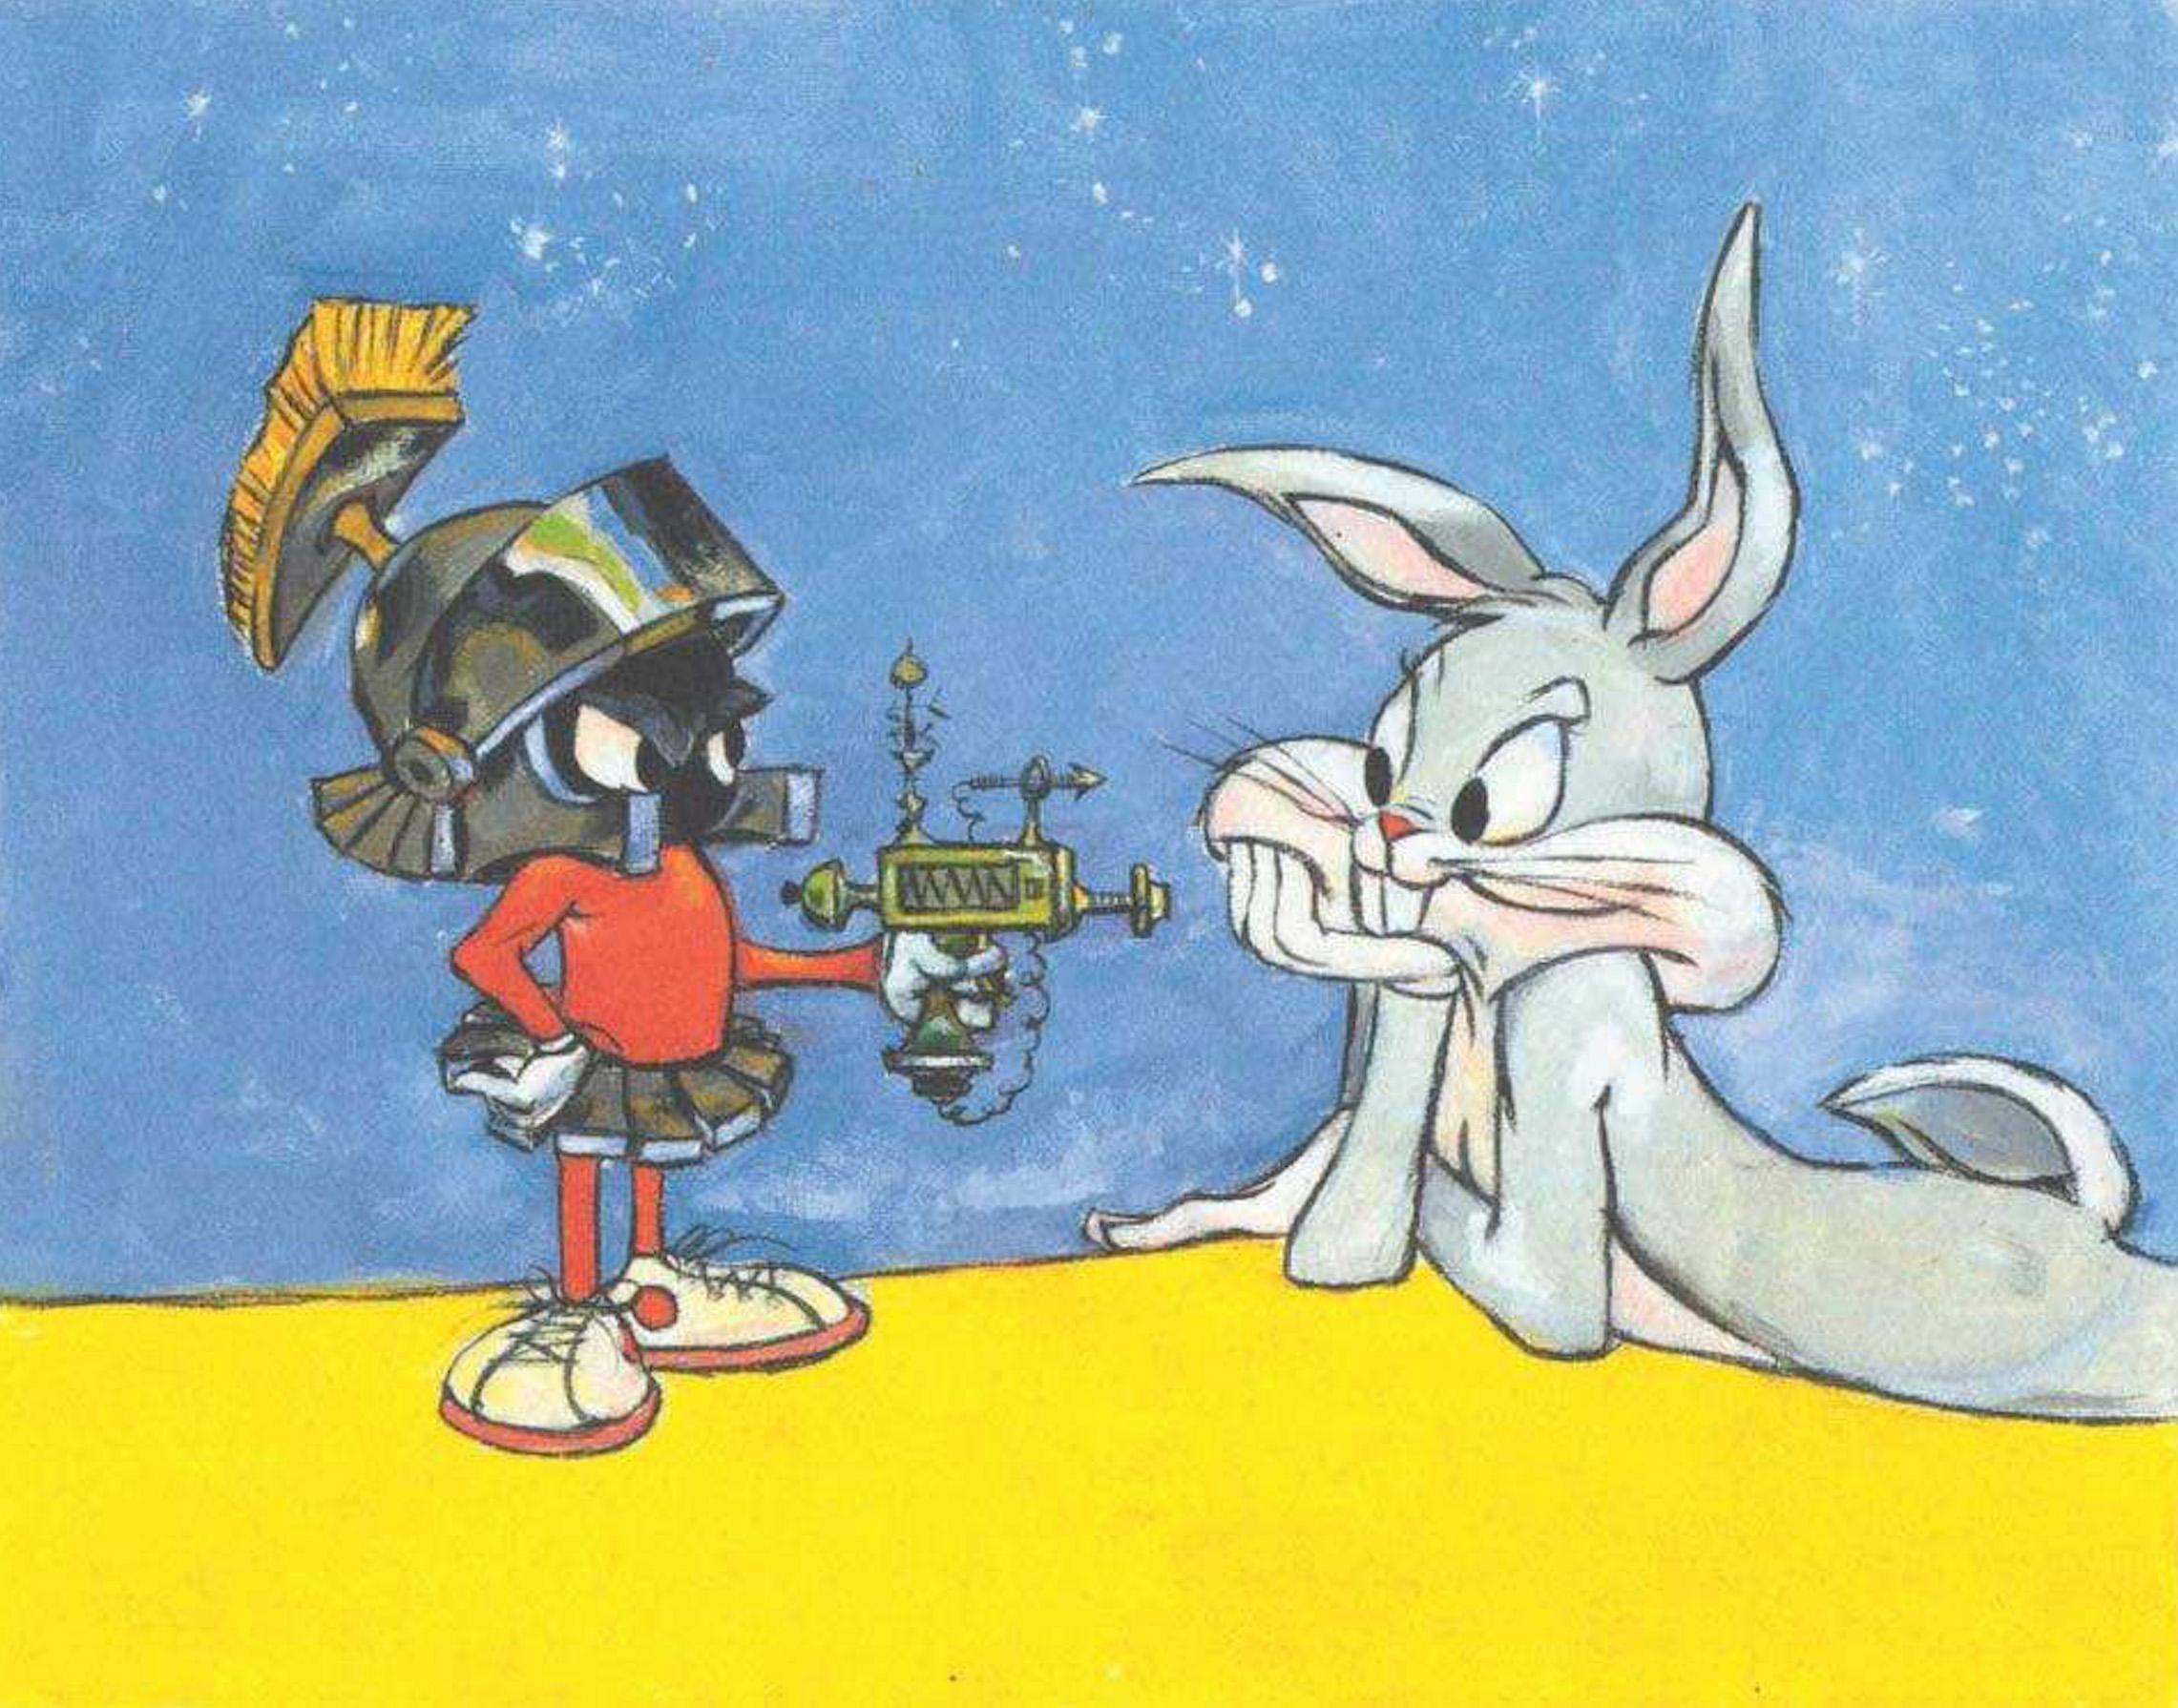 Invasion of the Bunny Snatchers by Chuck Jones